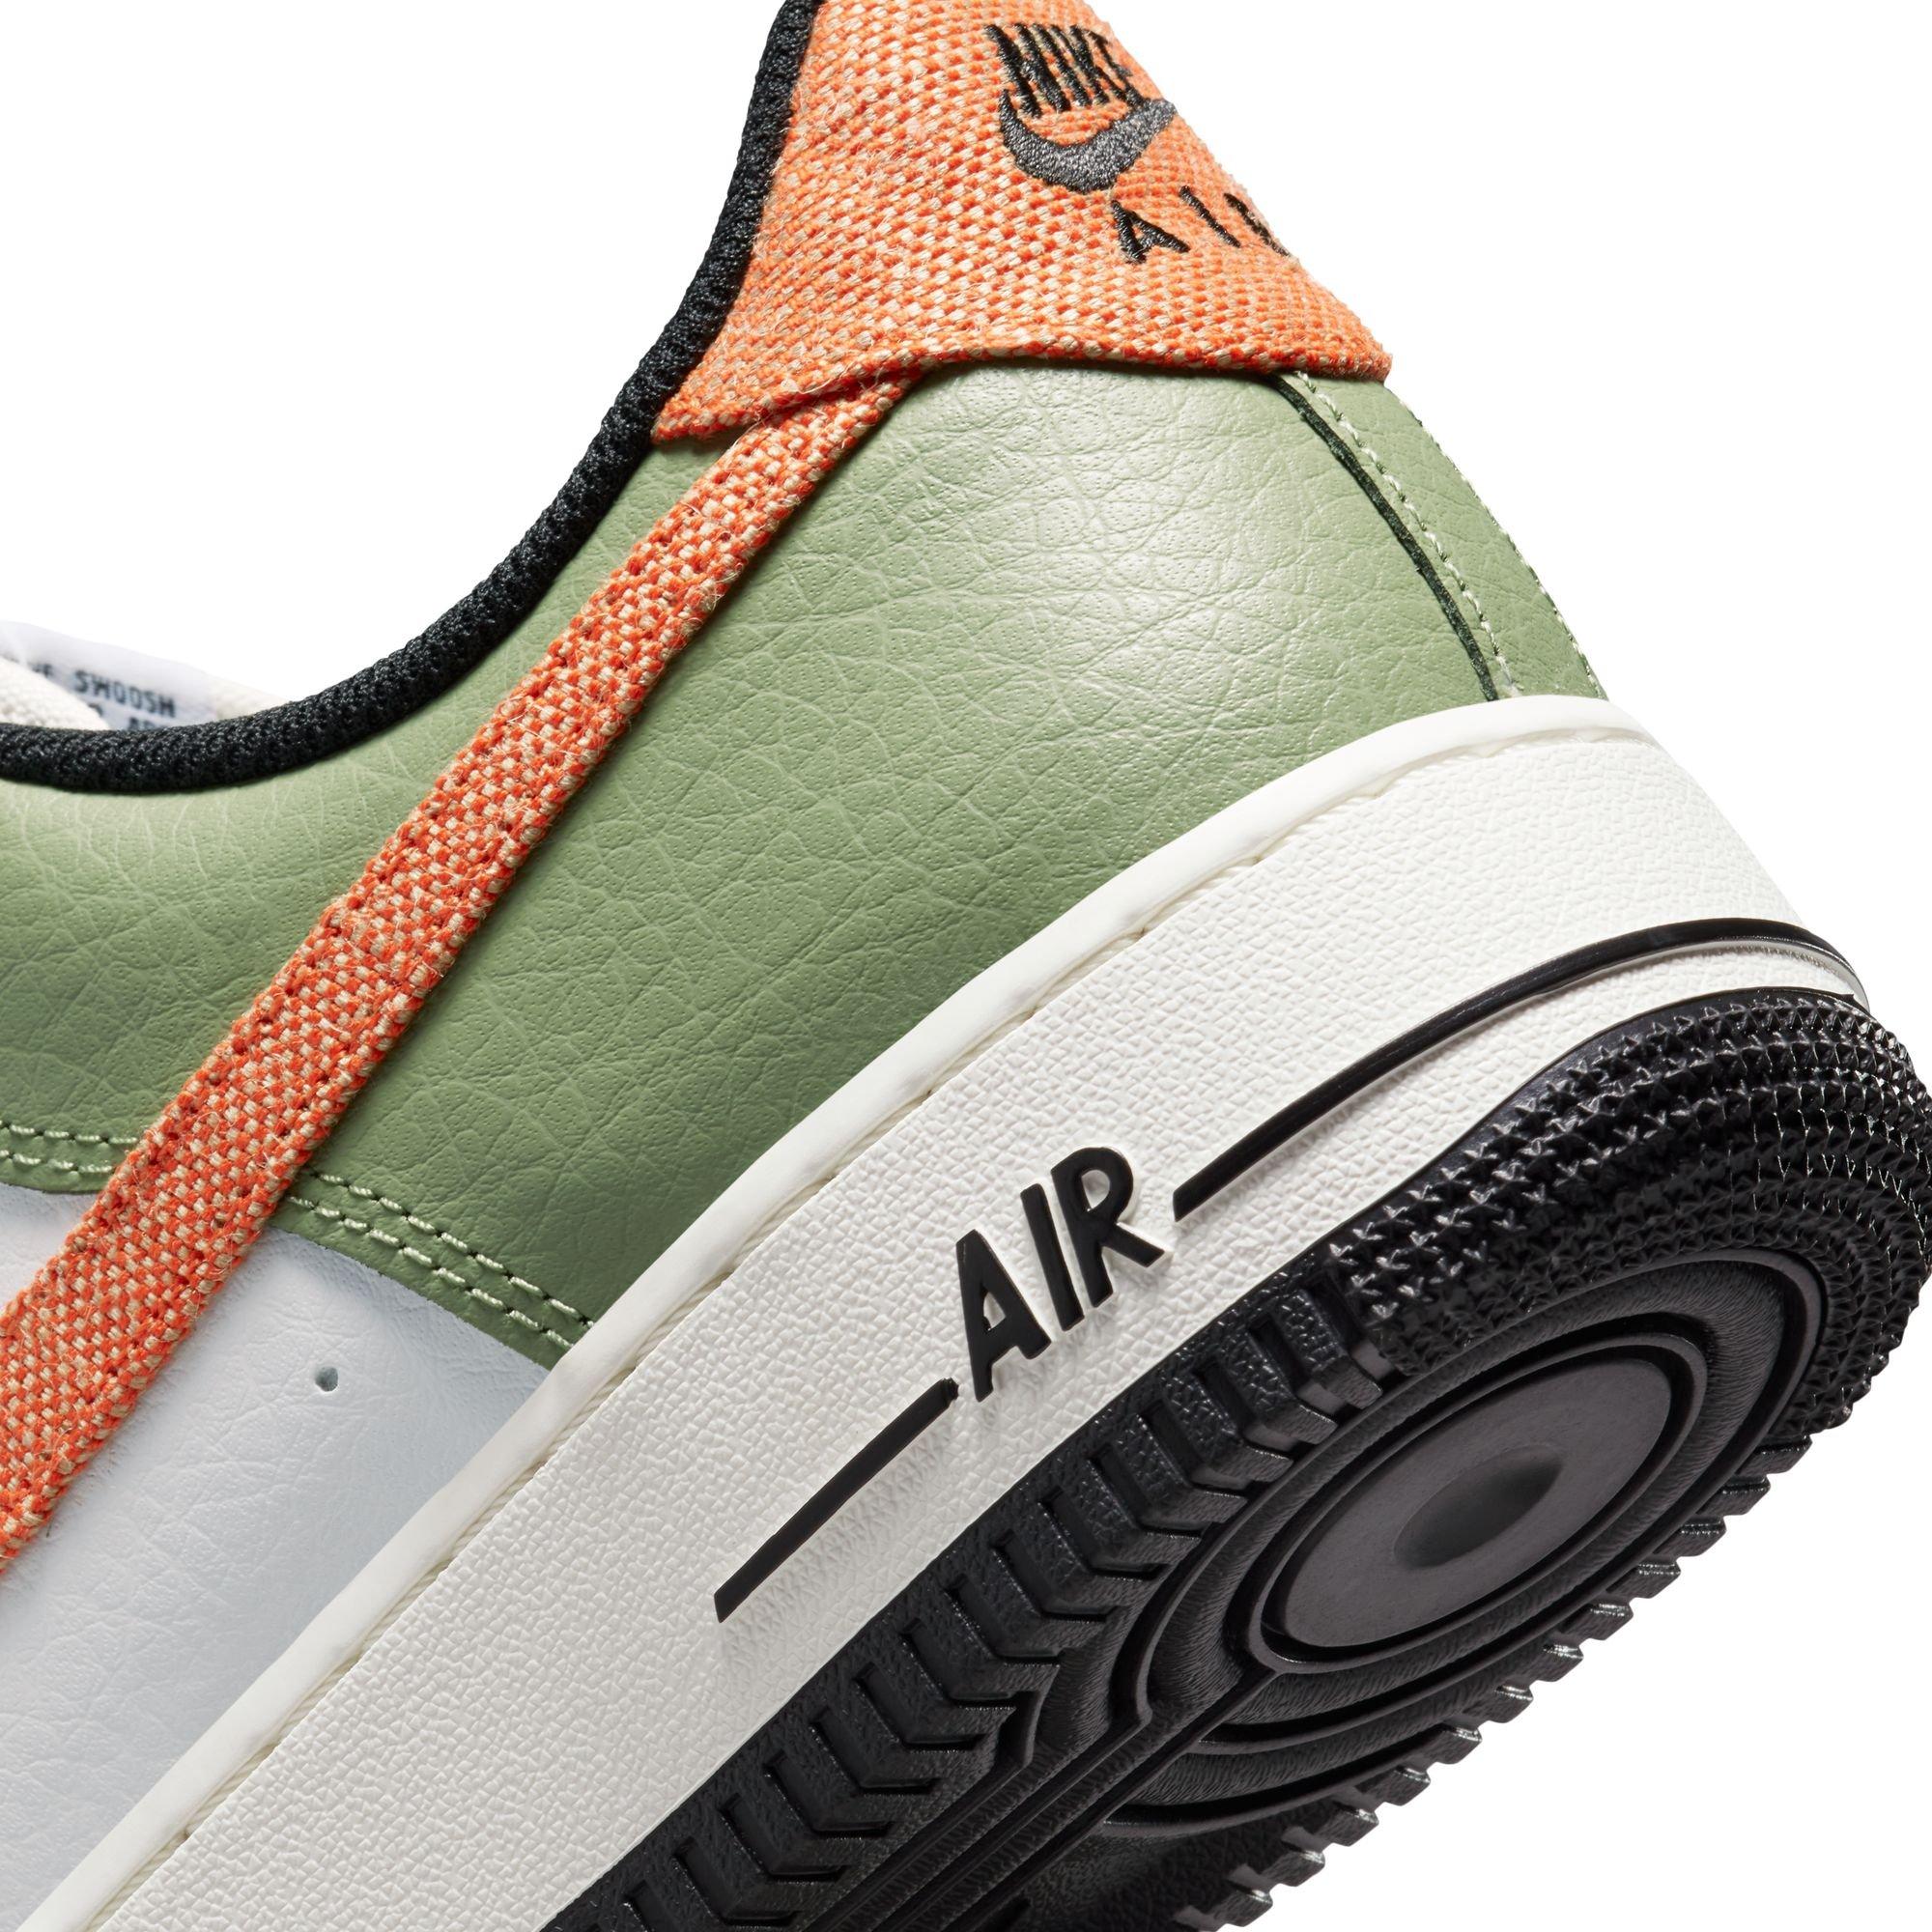 AIR FORCE 1 LOW RETRO COLOR OF THE MONTH - SAFETY ORANGE